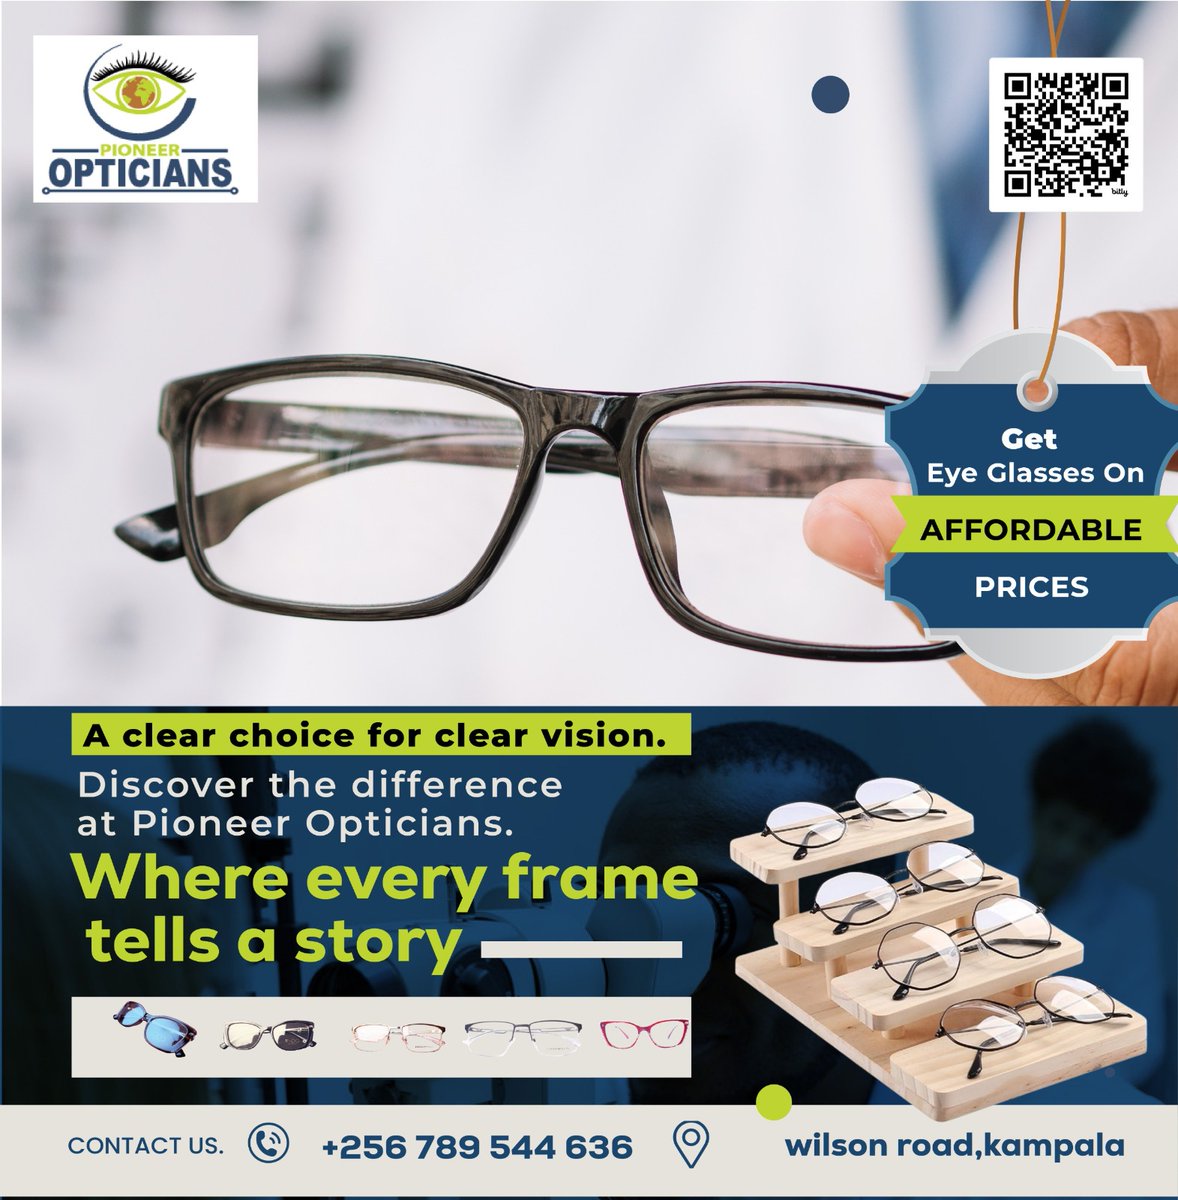 Your sight is our priority  
Seeing is believing, and at Pioneer Optician, we believe in helping you see the world in all its beauty. Our team of experienced optometrists is dedicated to providing you with the highest quality eye care, using the latest technology and techniques.